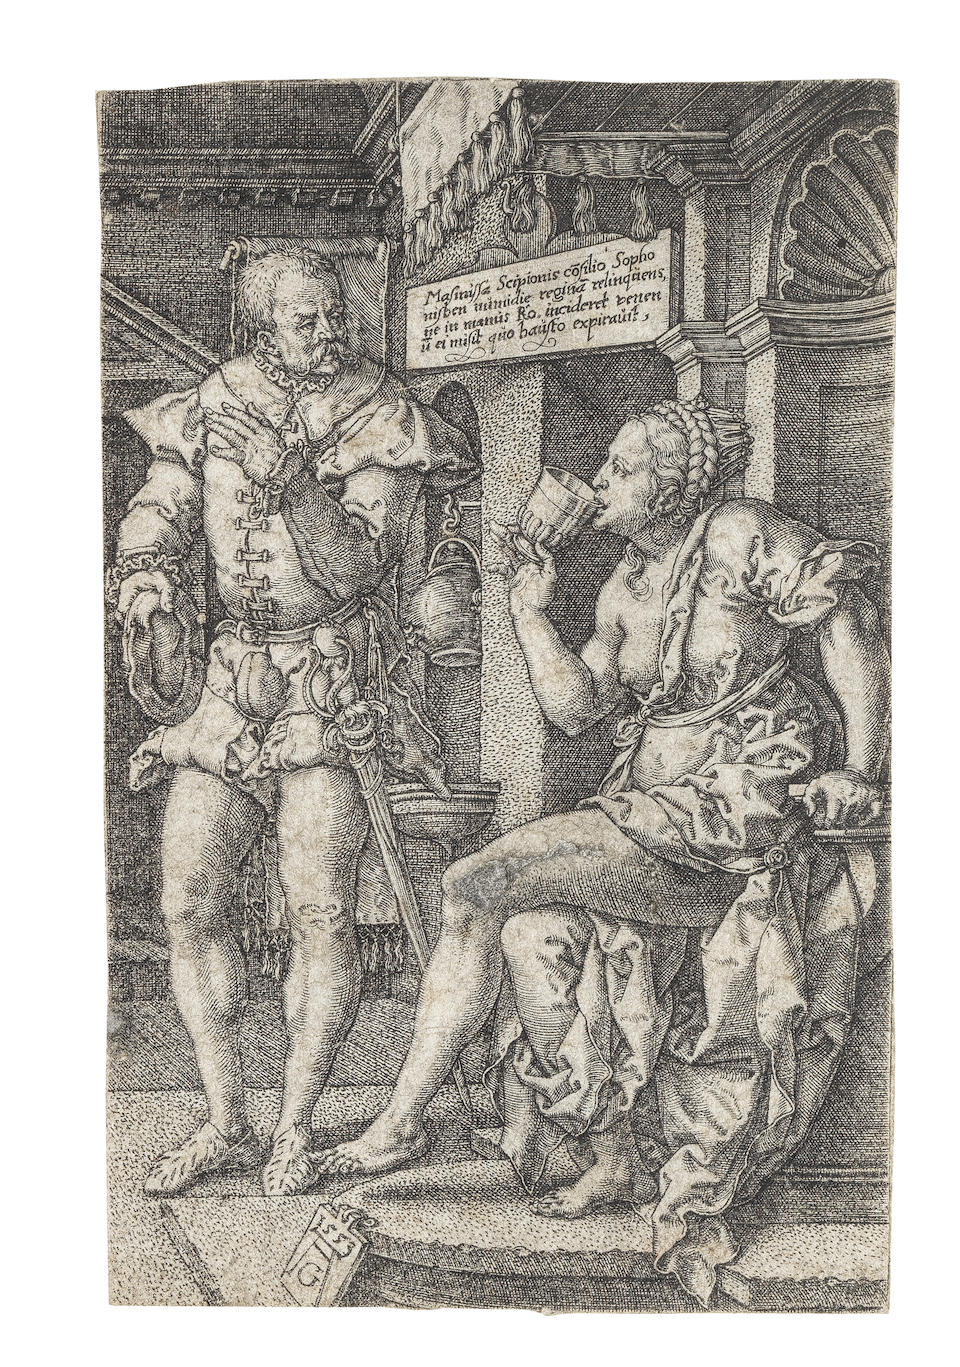 Heinrich Aldegrever (1502-1555) A Collection of twenty-two engravings Religious and ornamental designs, including The Judgement of Solomon, 1555, David tearing his clothes in grief, 1540, Sophonisba, 1553, Sextus Tarquinius and Lucretia, 1553, St Mark, 1539, Adam with a Lion, 1530, Children dancing under a canopy, circa 1532, Double scroll leaf ornament with a putto, 1549, predominantly on laid paper, good to fair impressions, several later impressions, most trimmed to or on the platemark, various conditions Plate 122 x 80mm. (4 7/8 x 31/8in.)(and smaller) 22